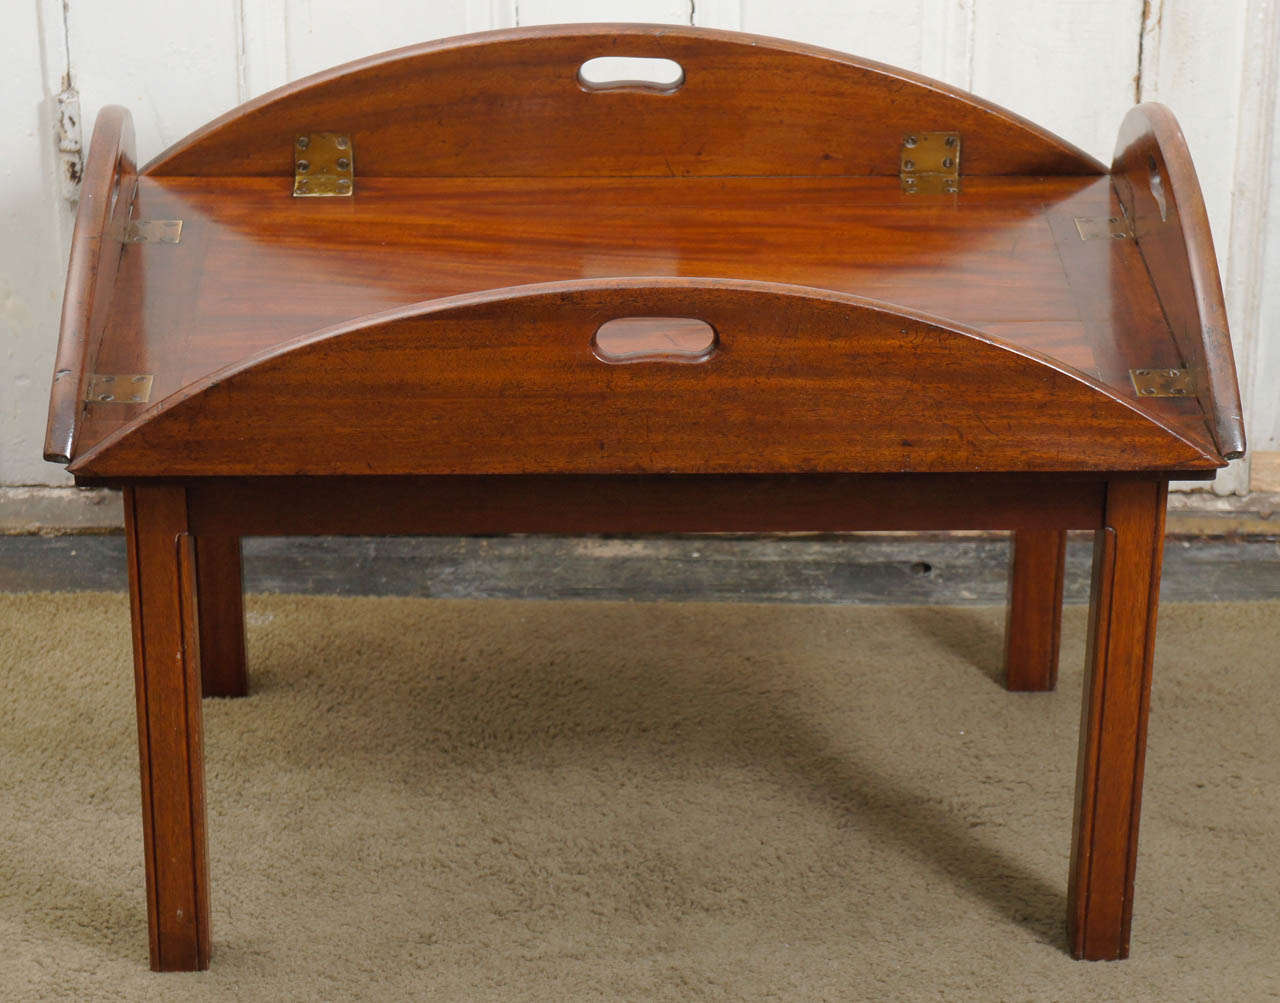 This very fine 19th century mahogany tray made circa 1840 set upon a later coffee table stand is of the very best quality. The mahogany is first choice and retains a great degree of its color and patina set with heavy brass hinges. The grain is